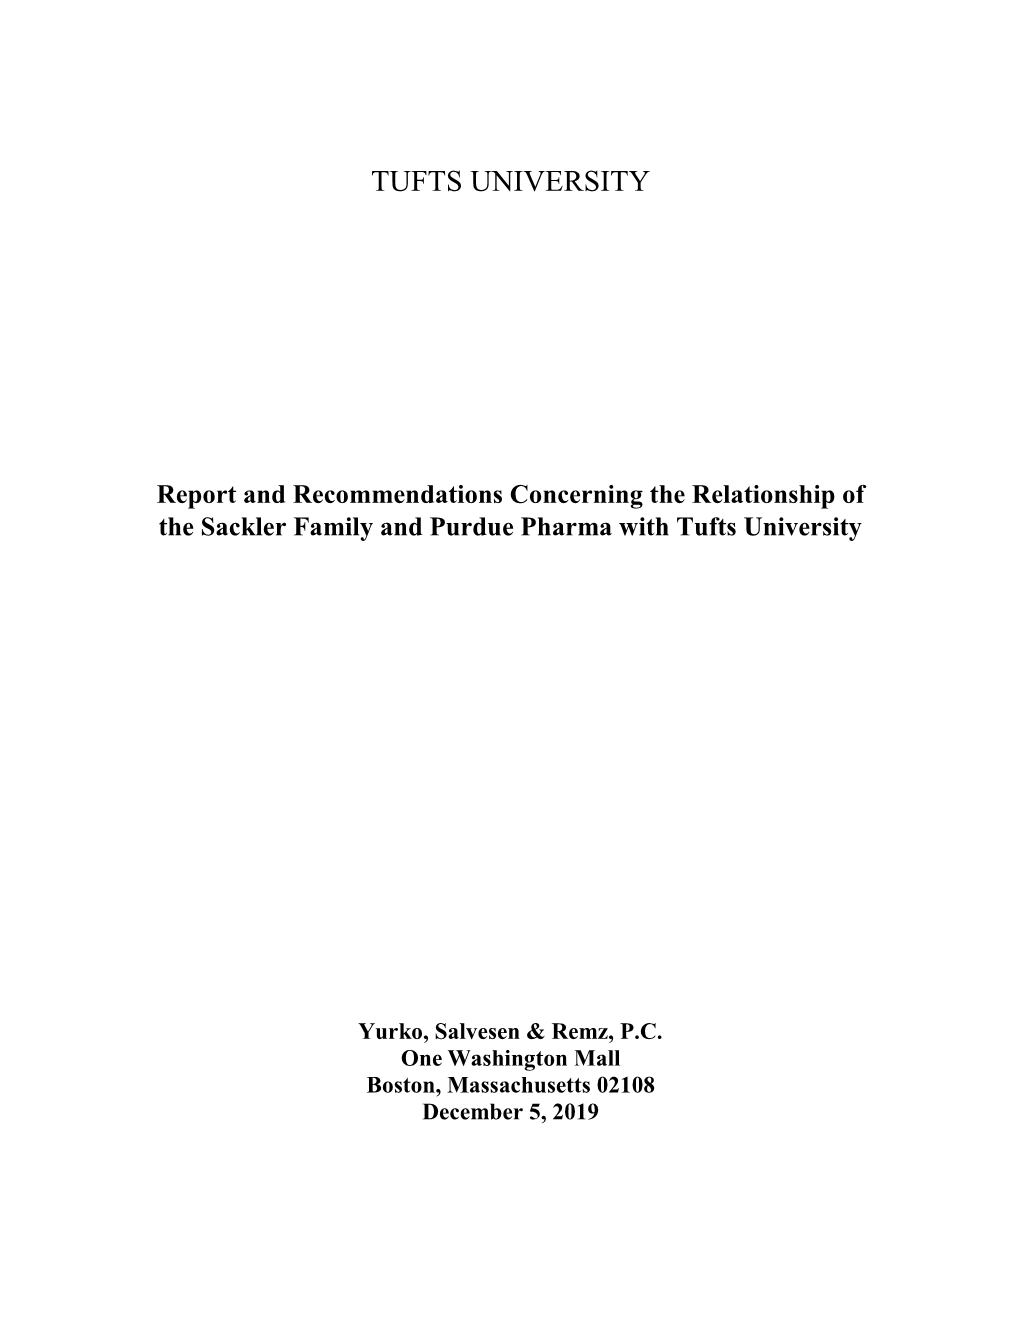 Report and Recommendations Concerning the Relationship of the Sackler Family and Purdue Pharma with Tufts University